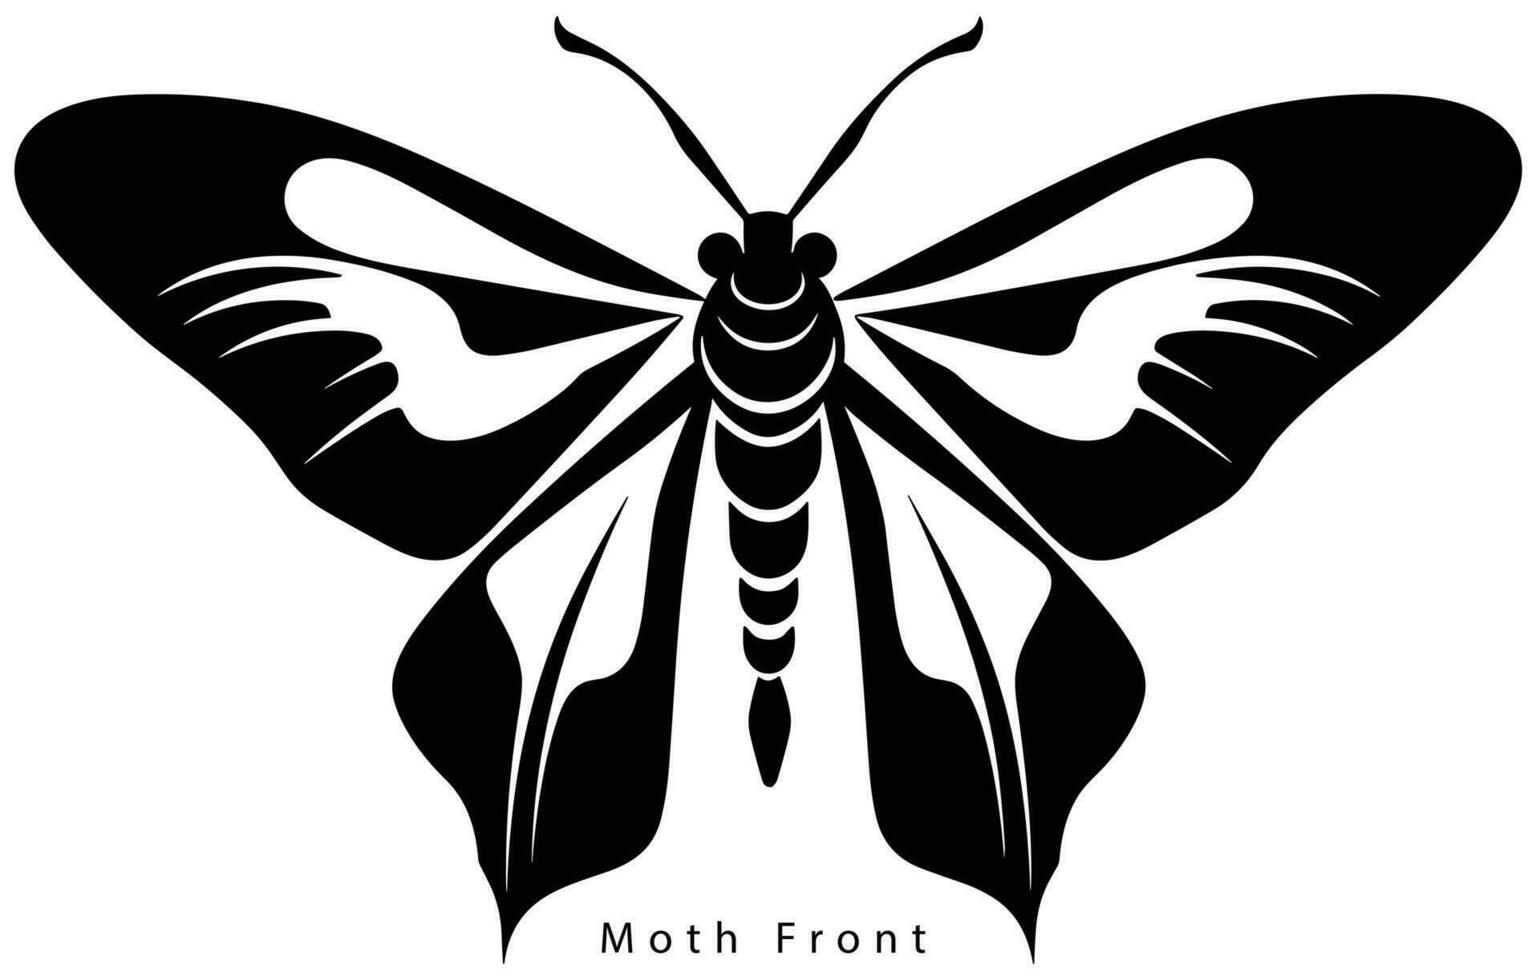 Monarch butterfly silhouette. Vector illustration